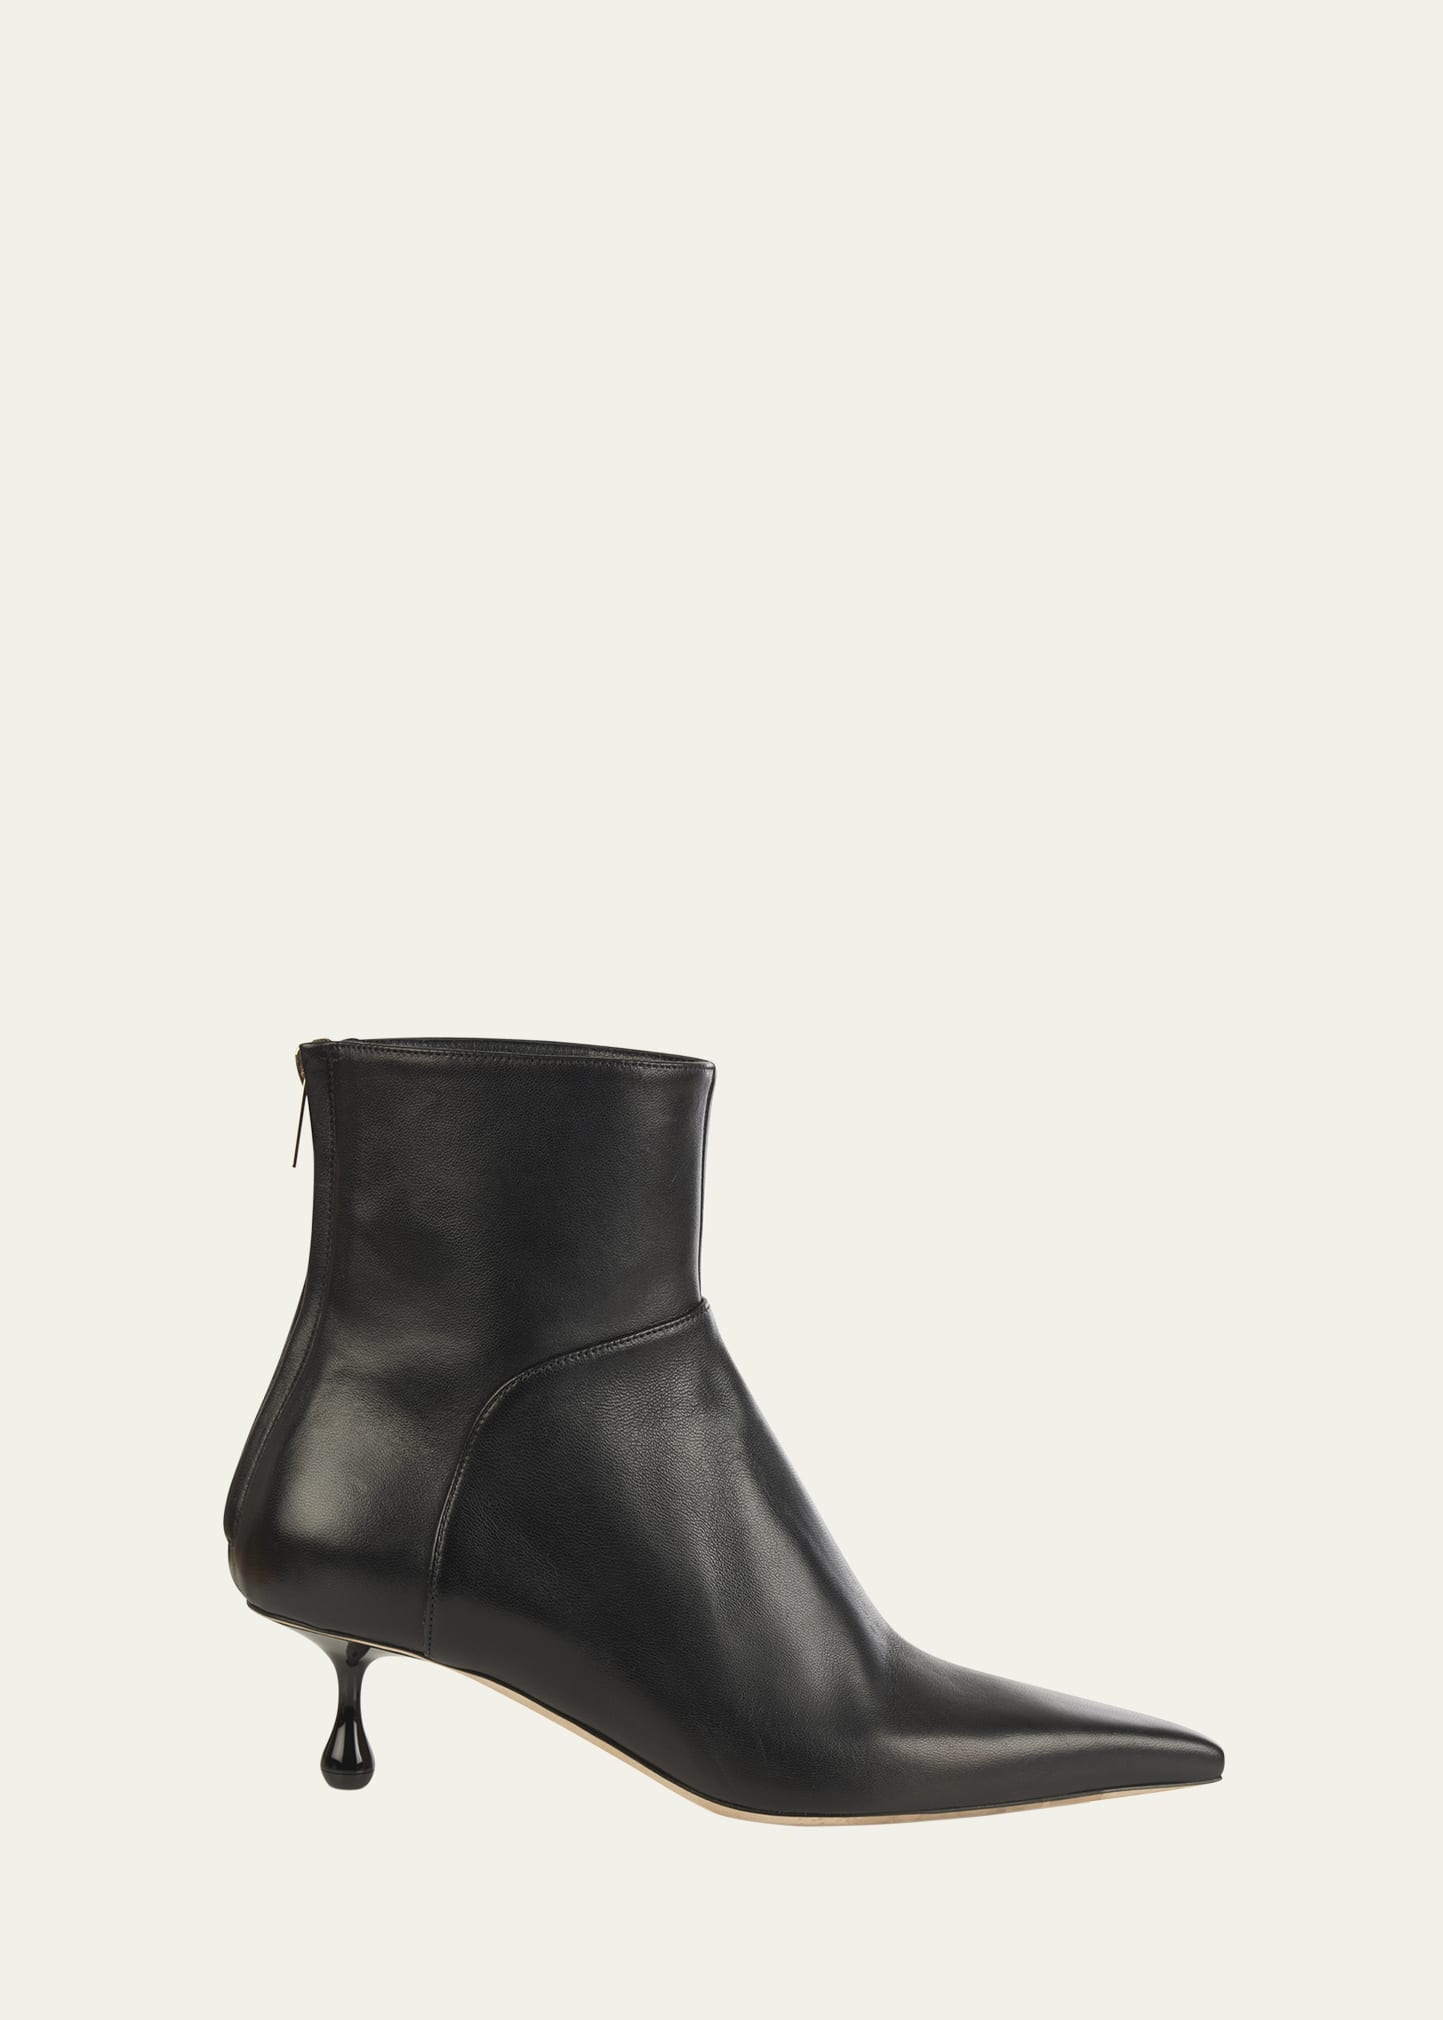 CYCAS AB 50, Black Nappa Leather Ankle Boots, New Collection